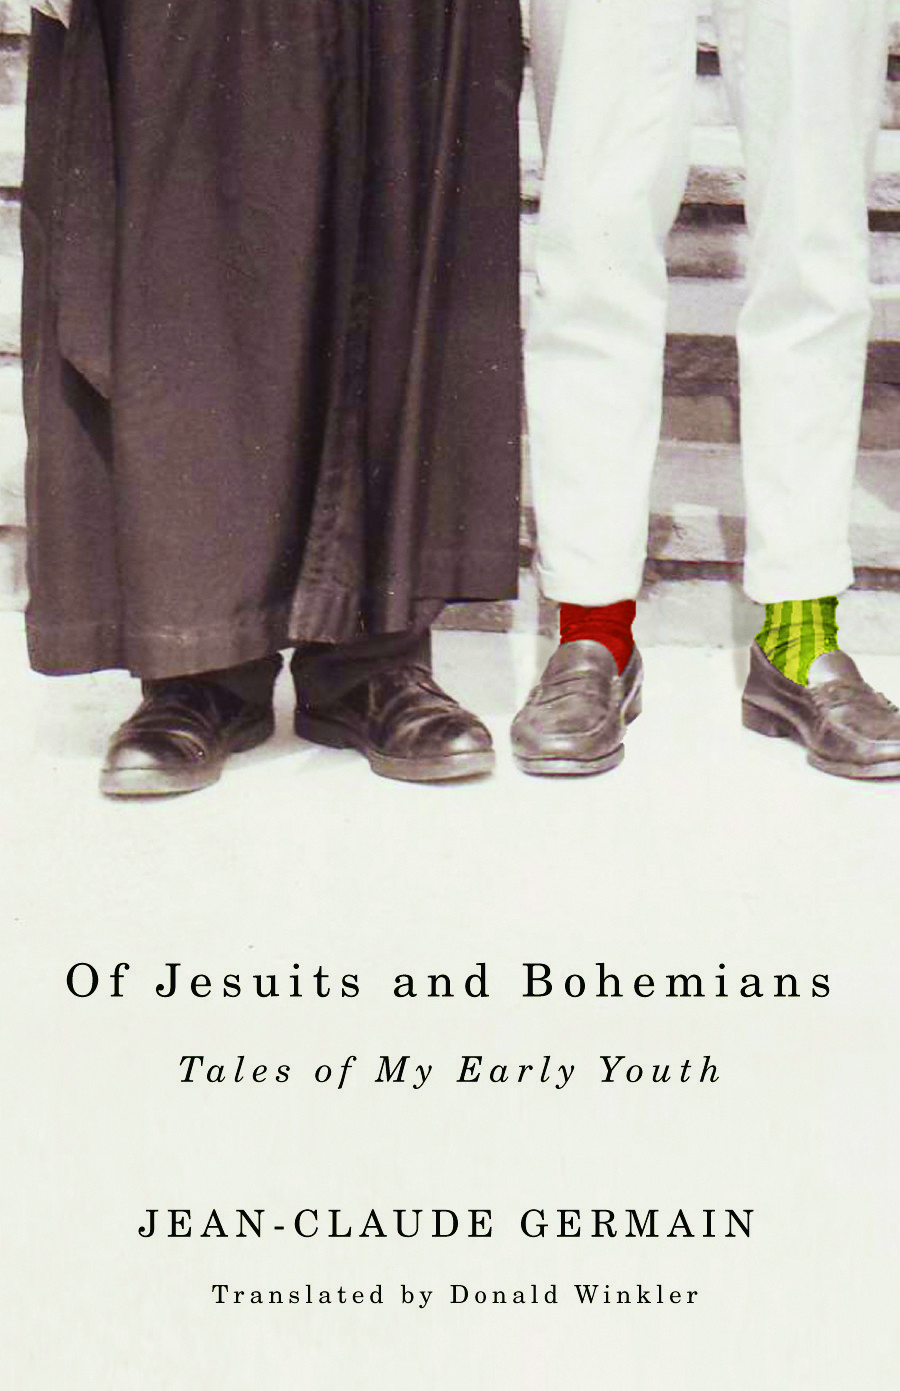 Of Jesuits and Bohemians, by Jean-Claude Germain